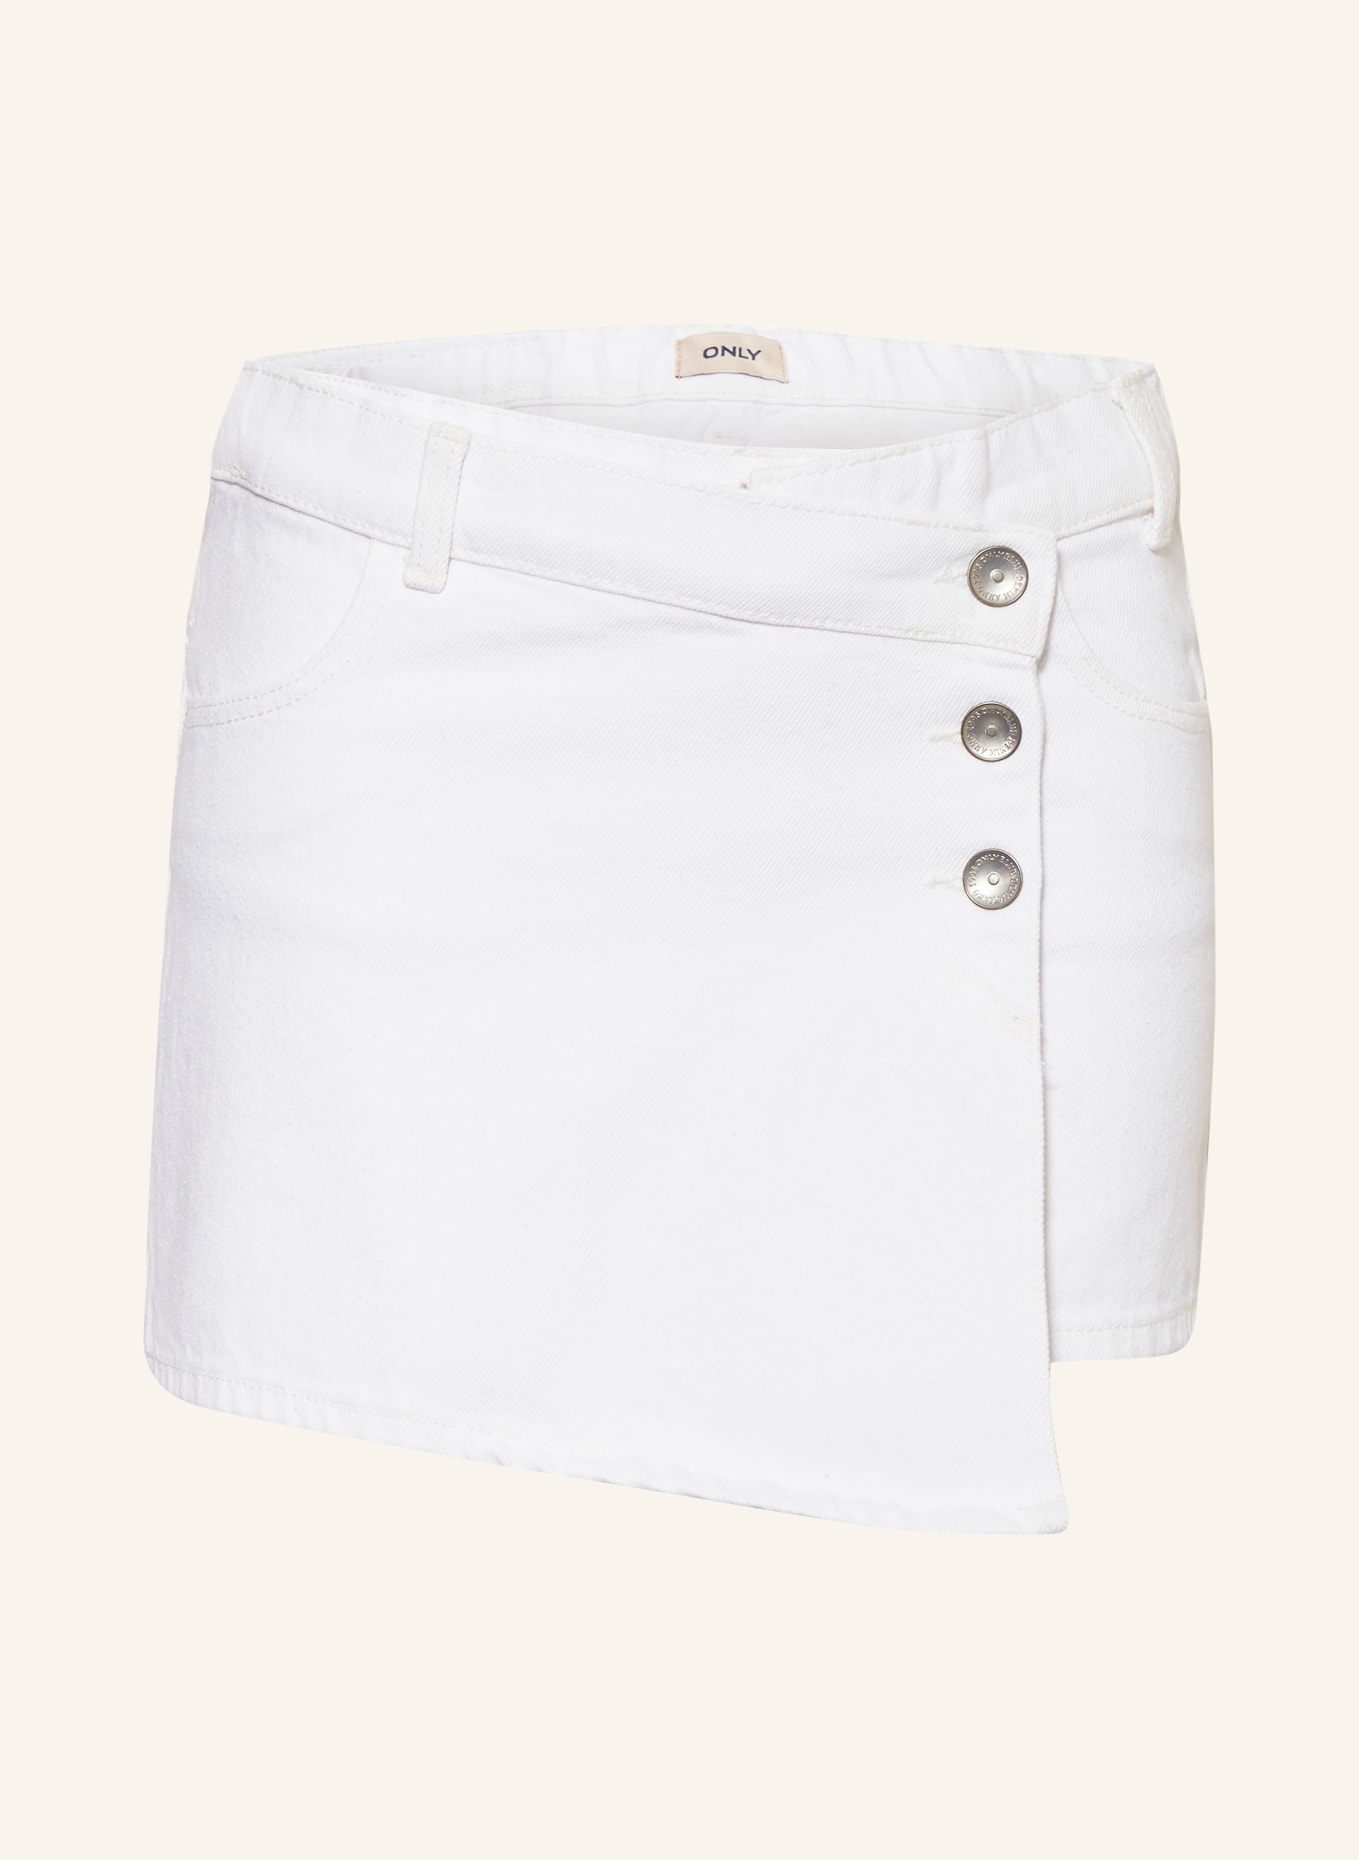 ONLY Jeansshorts, Farbe: WEISS (Bild 1)